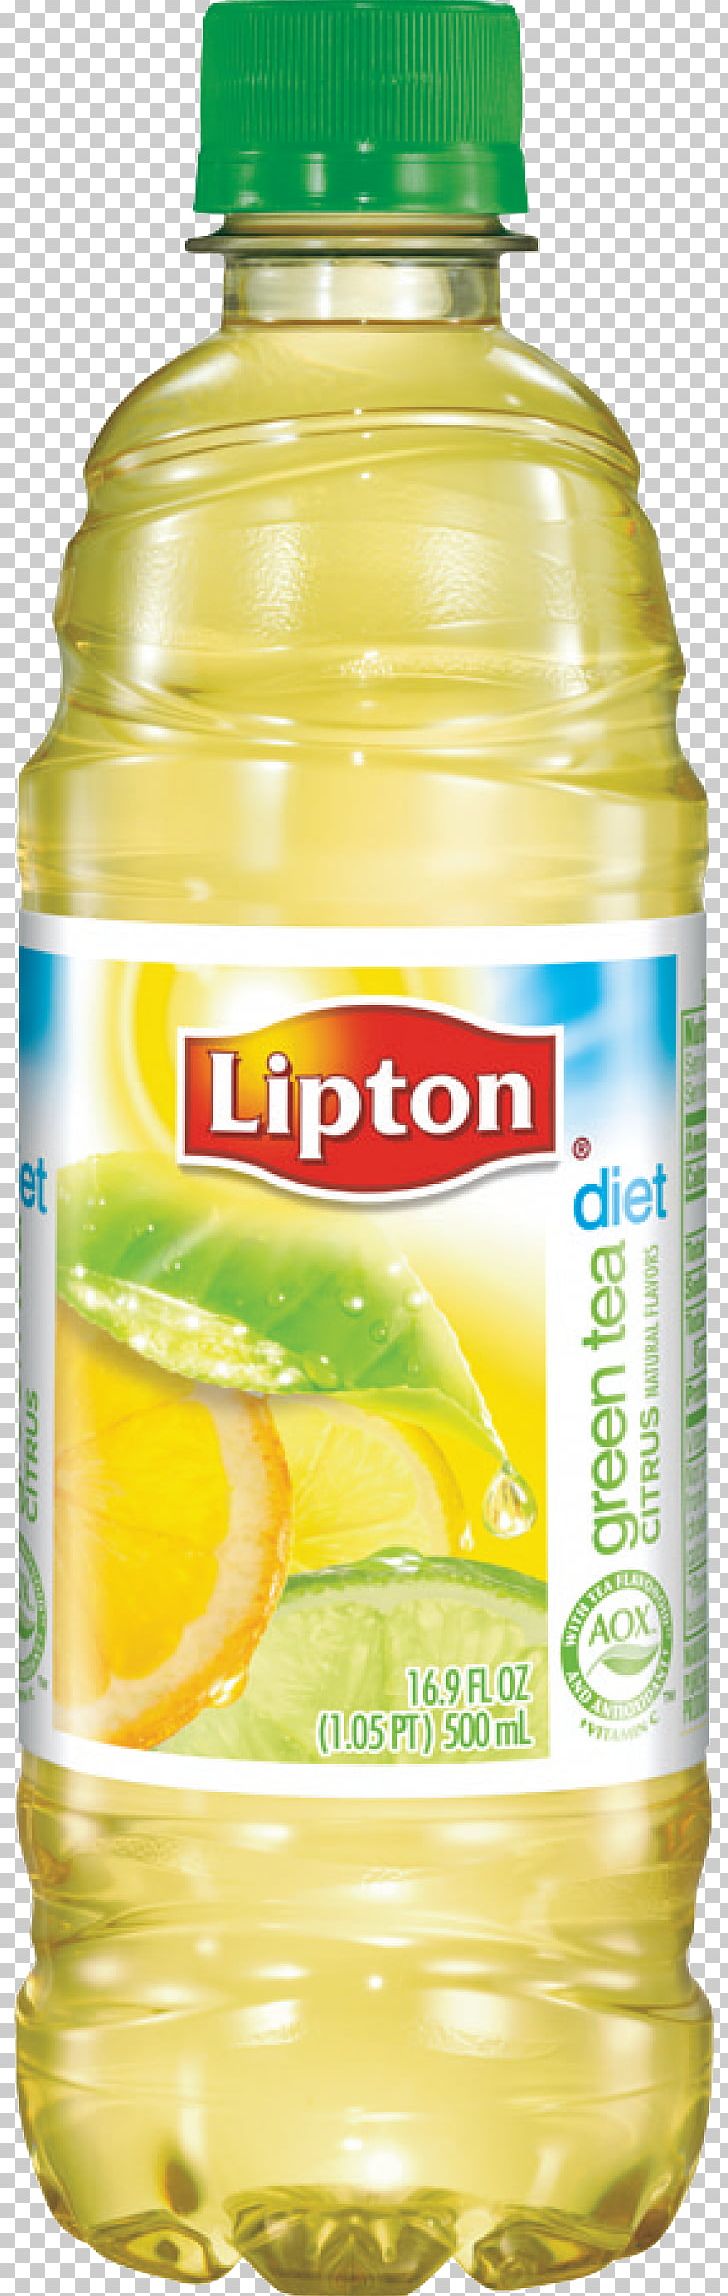 Green Tea Iced Tea White Tea Lipton PNG, Clipart, Bottle, Citrus, Cooking Oil, Diet, Drink Free PNG Download